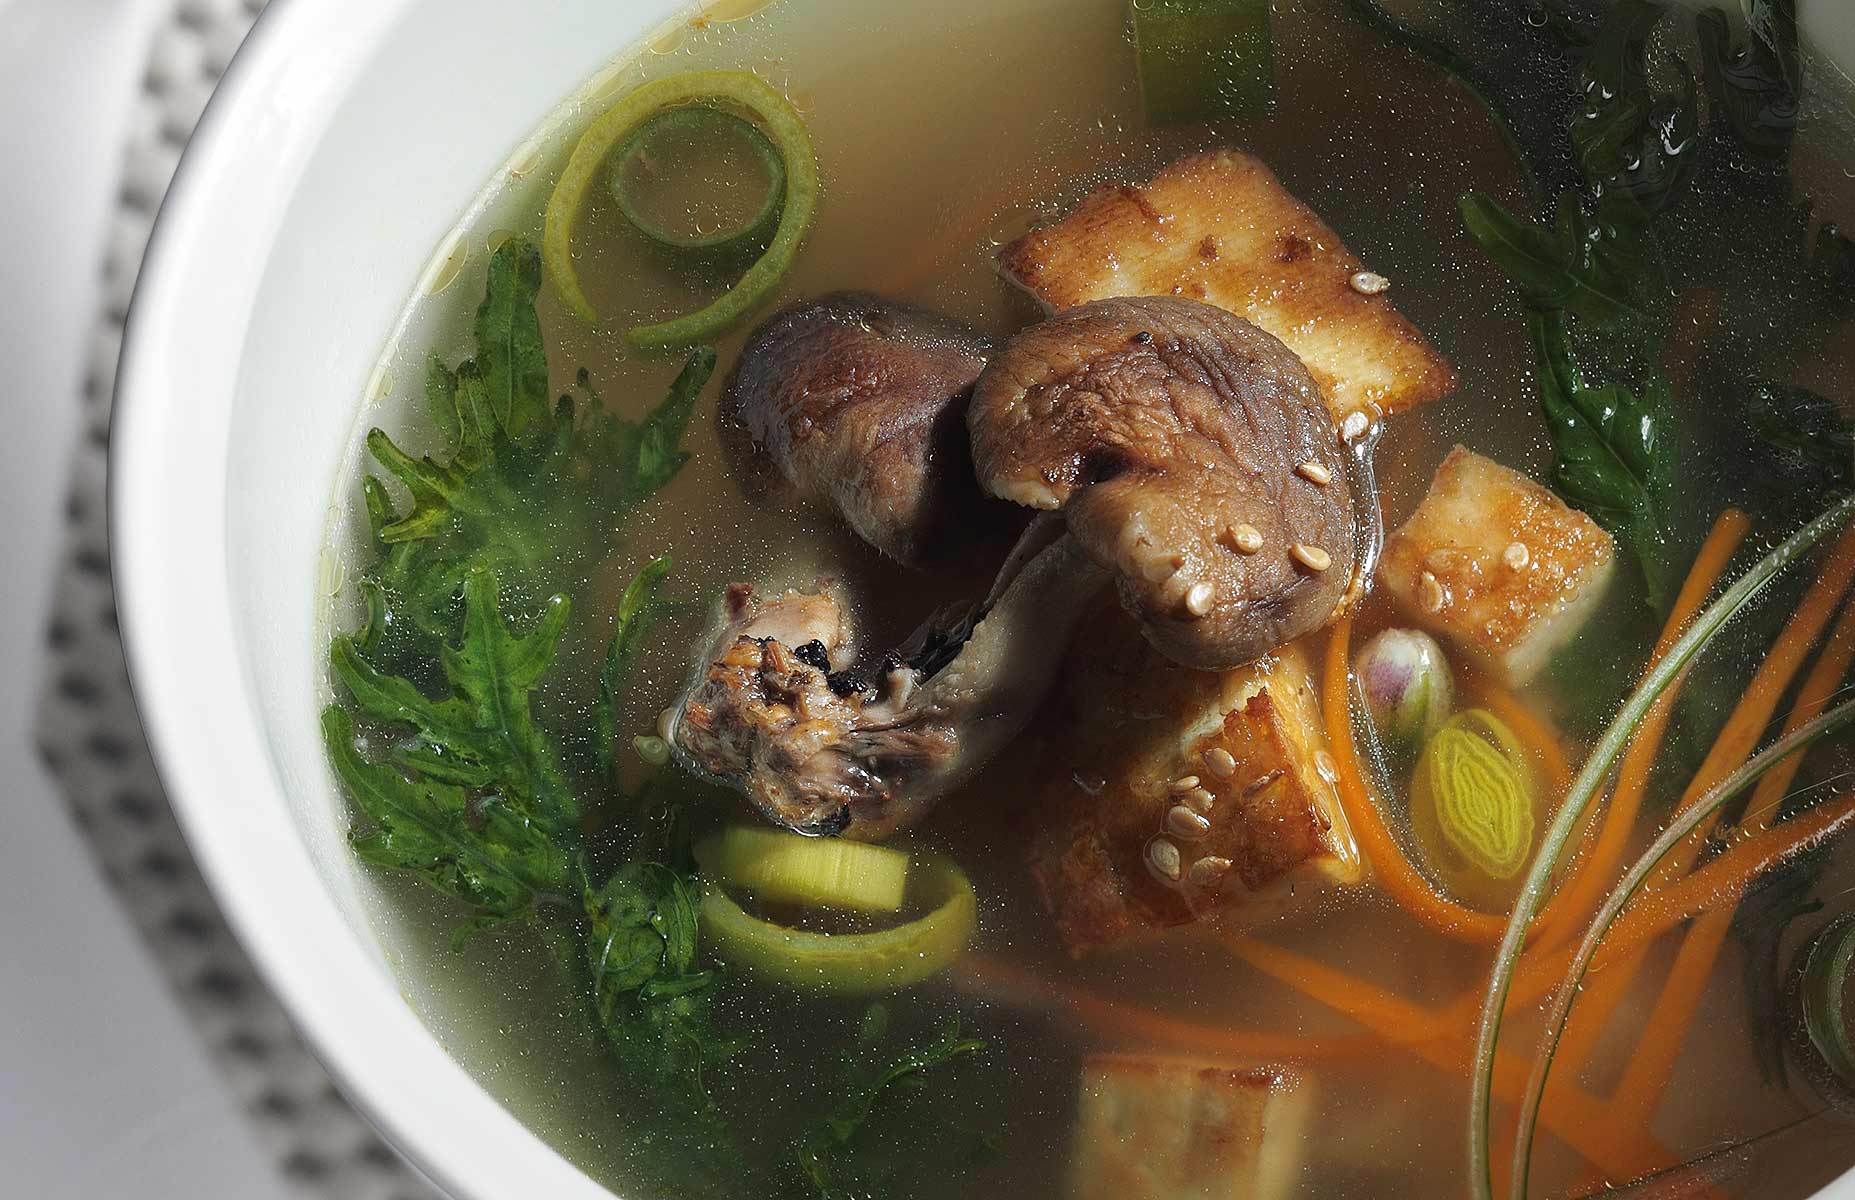 This image of Miso Soup is photographed at a 45º angle and is cropped tightly in a landscape orientation. The dish incorporates leeks, carrots, seaweed and shitake mushrooms in a miso broth with sprinkles of sesame seeds in a white bowl. The back and side lighting technique creates depth in the broth and a sculptural effect to the mushrooms.